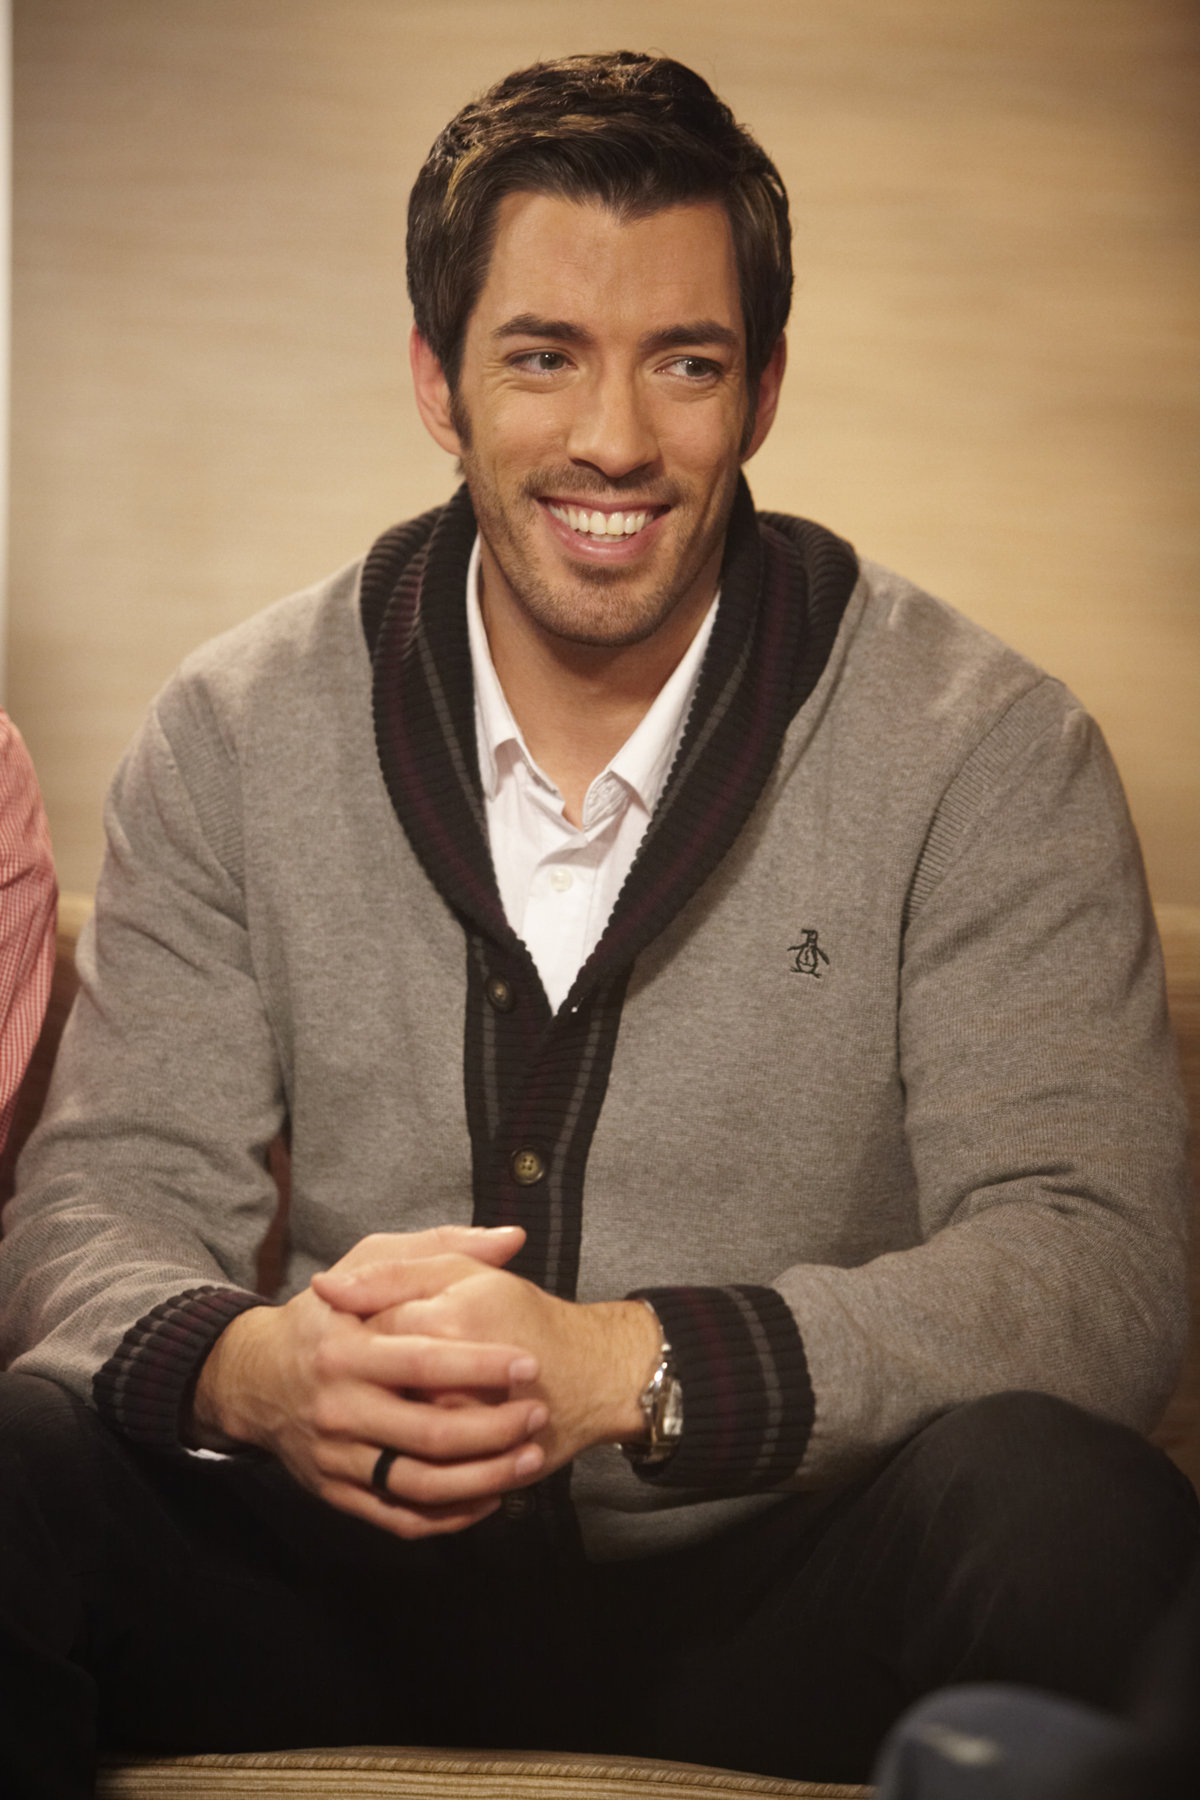 Production Still of Drew Scott on the set of Property Brothers